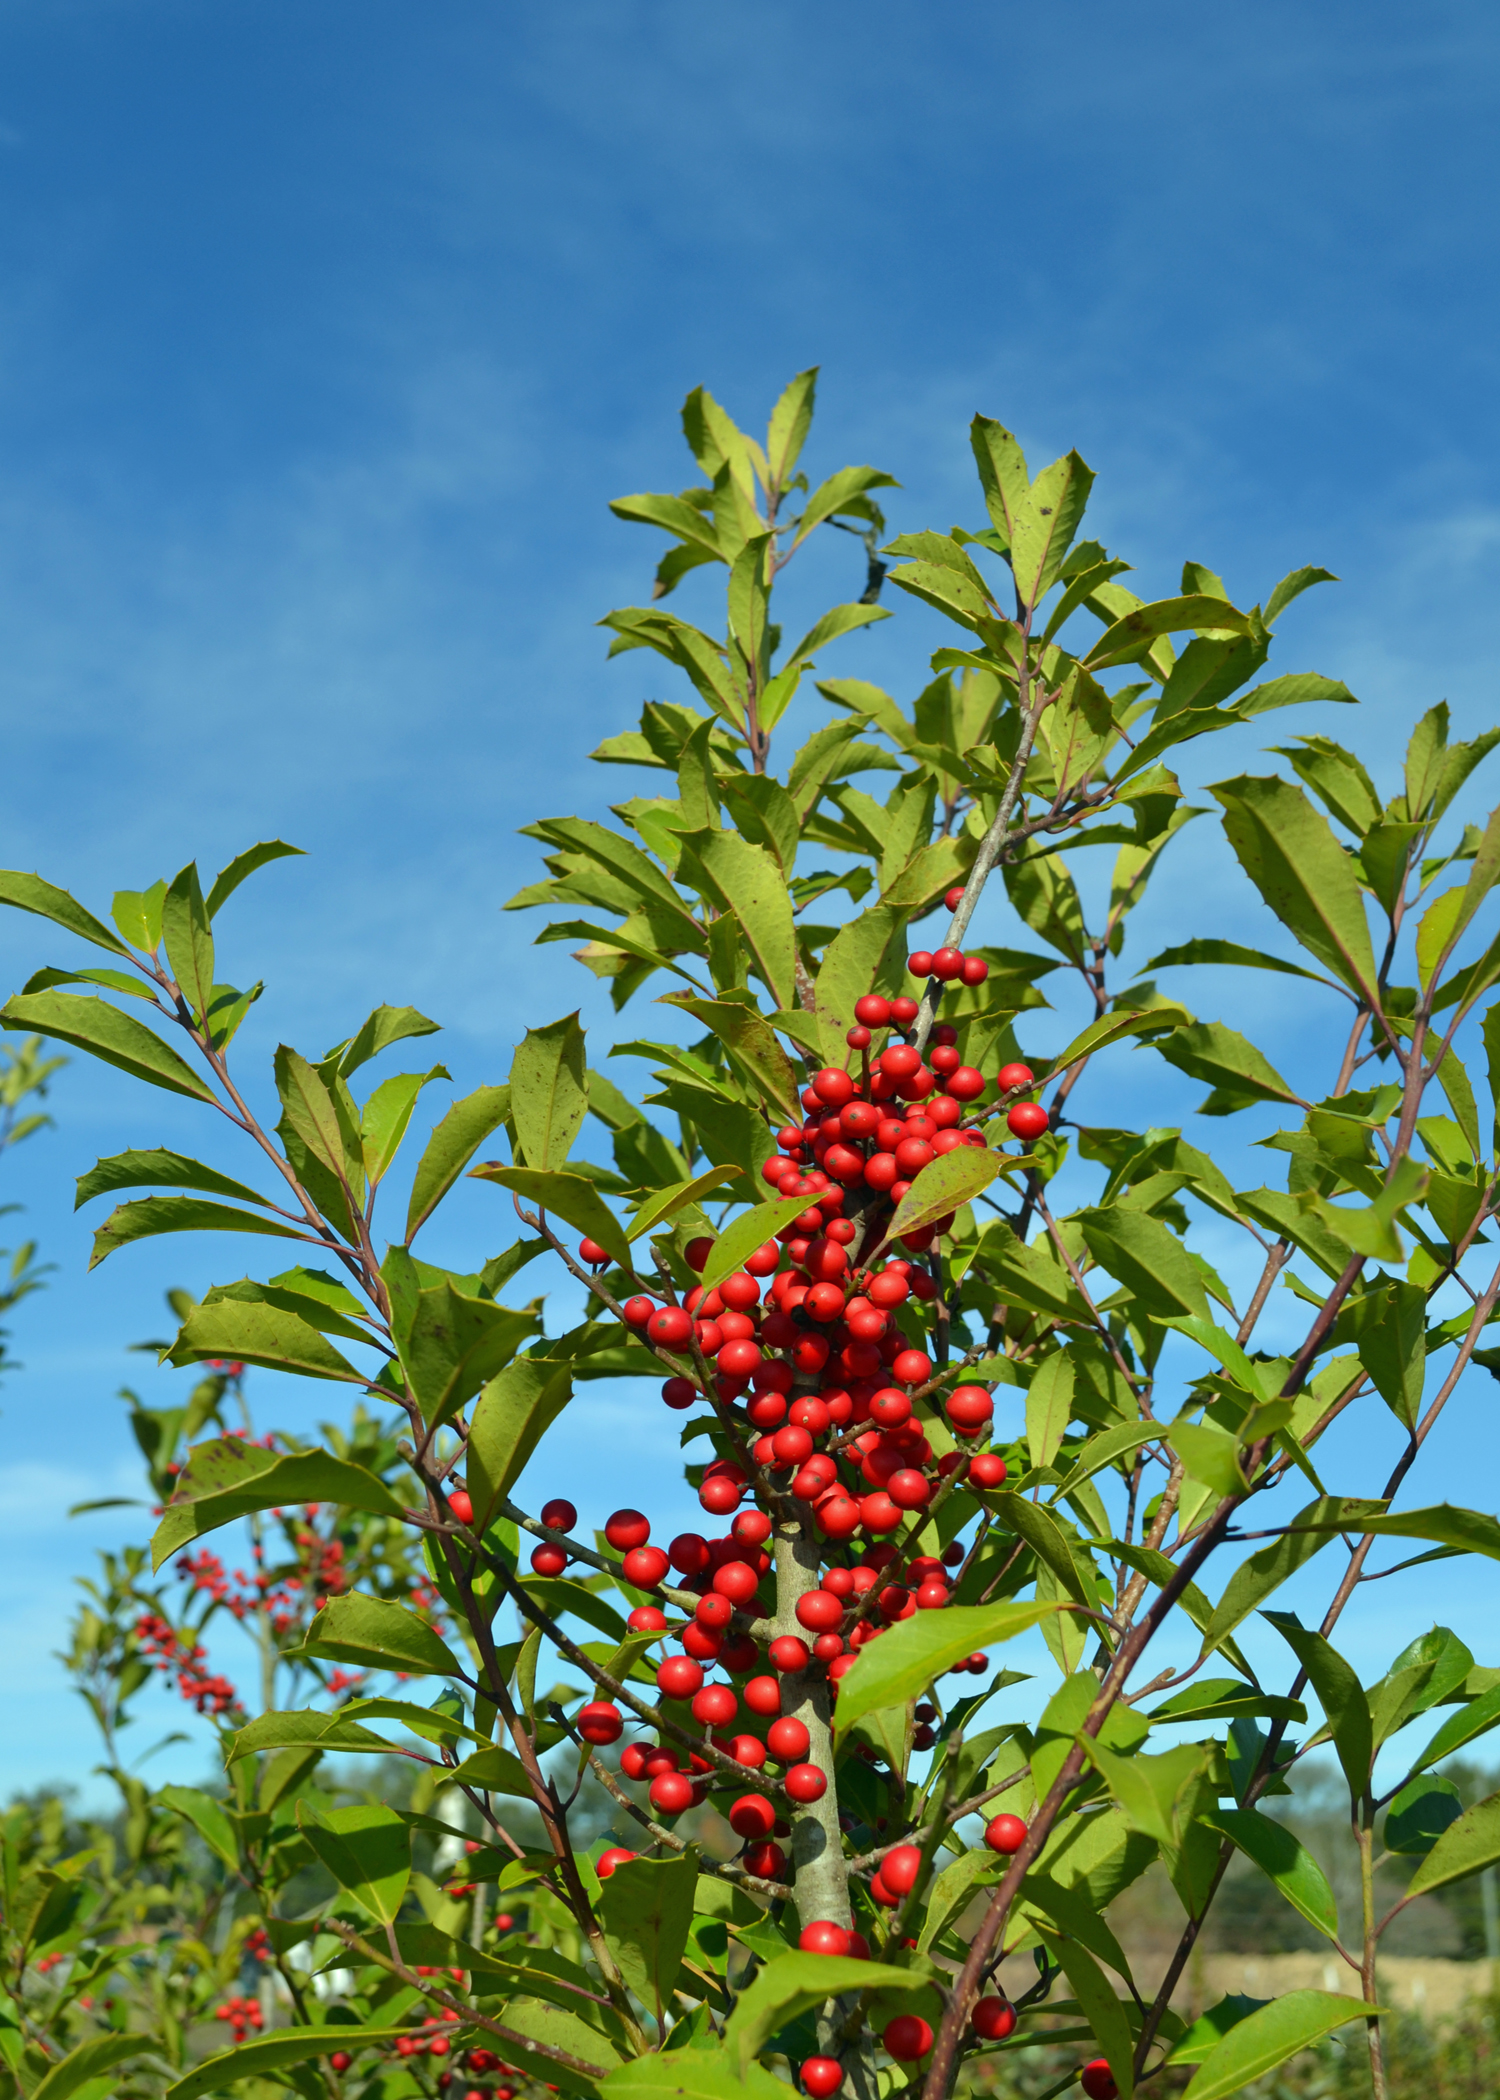 A green branch has a large cluster of red berries.